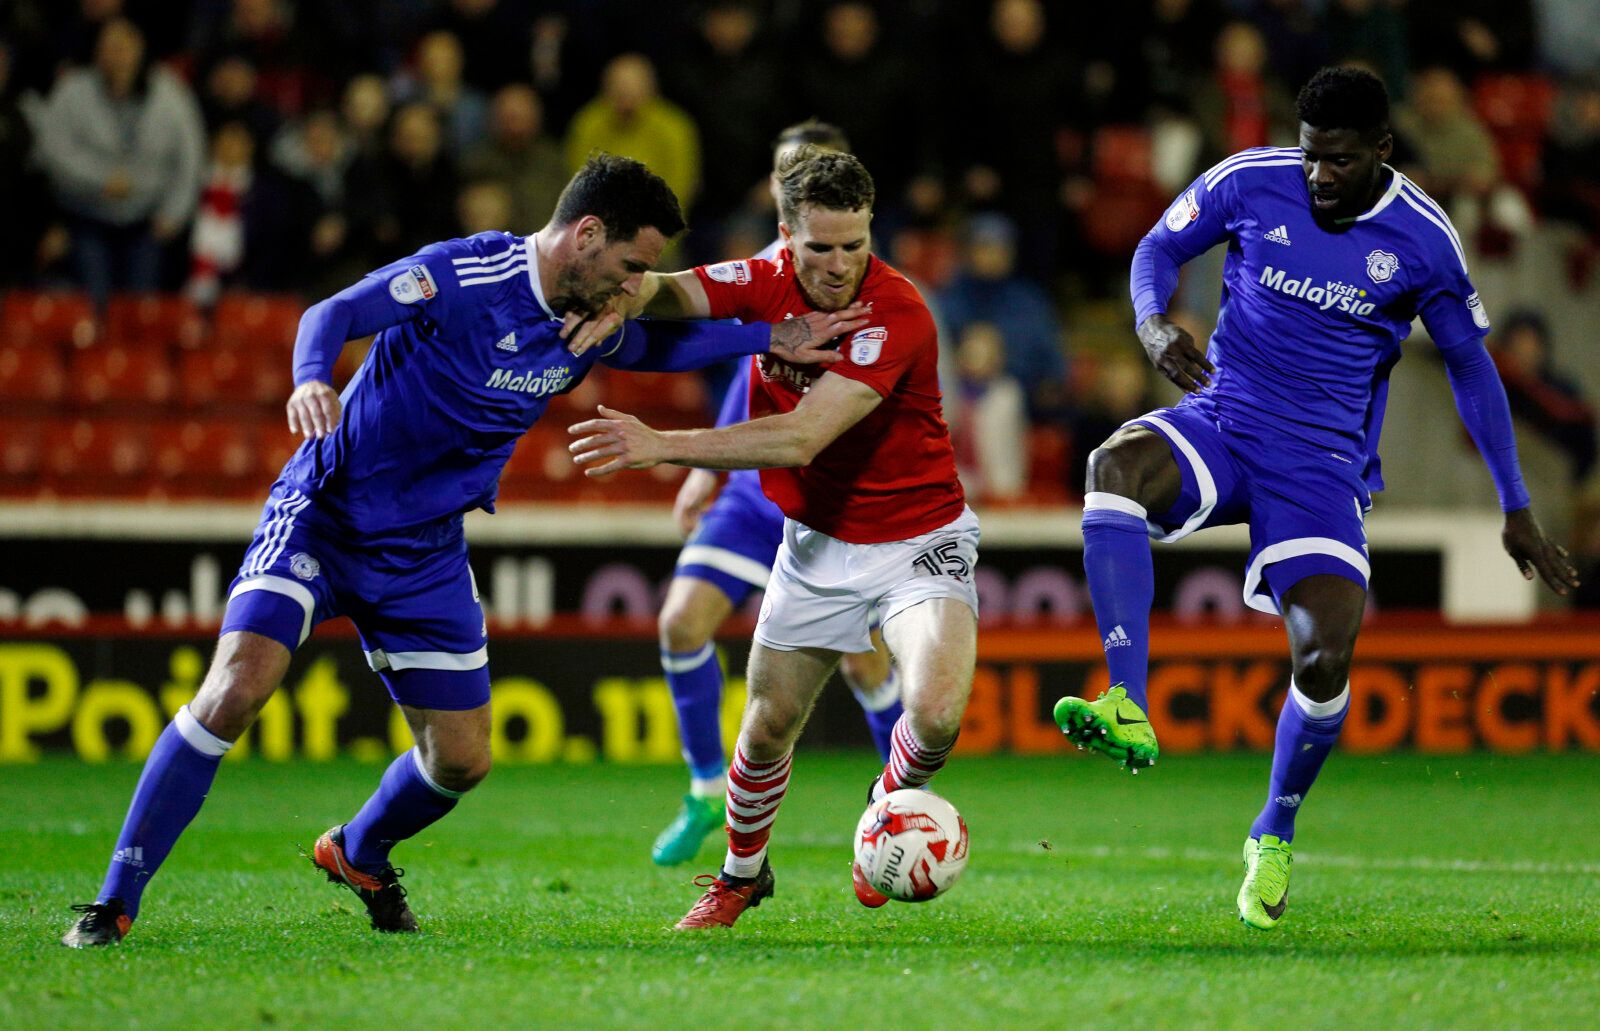 Britain Football Soccer - Barnsley v Cardiff City - Sky Bet Championship - Oakwell - 4/4/17 Cardiff City's Sean Morrison (L) and Bruno Ecuele Manga (R) in action with Barnsley's Marley Watkins Mandatory Credit: Action Images / Craig Brough Livepic EDITORIAL USE ONLY. No use with unauthorized audio, video, data, fixture lists, club/league logos or 